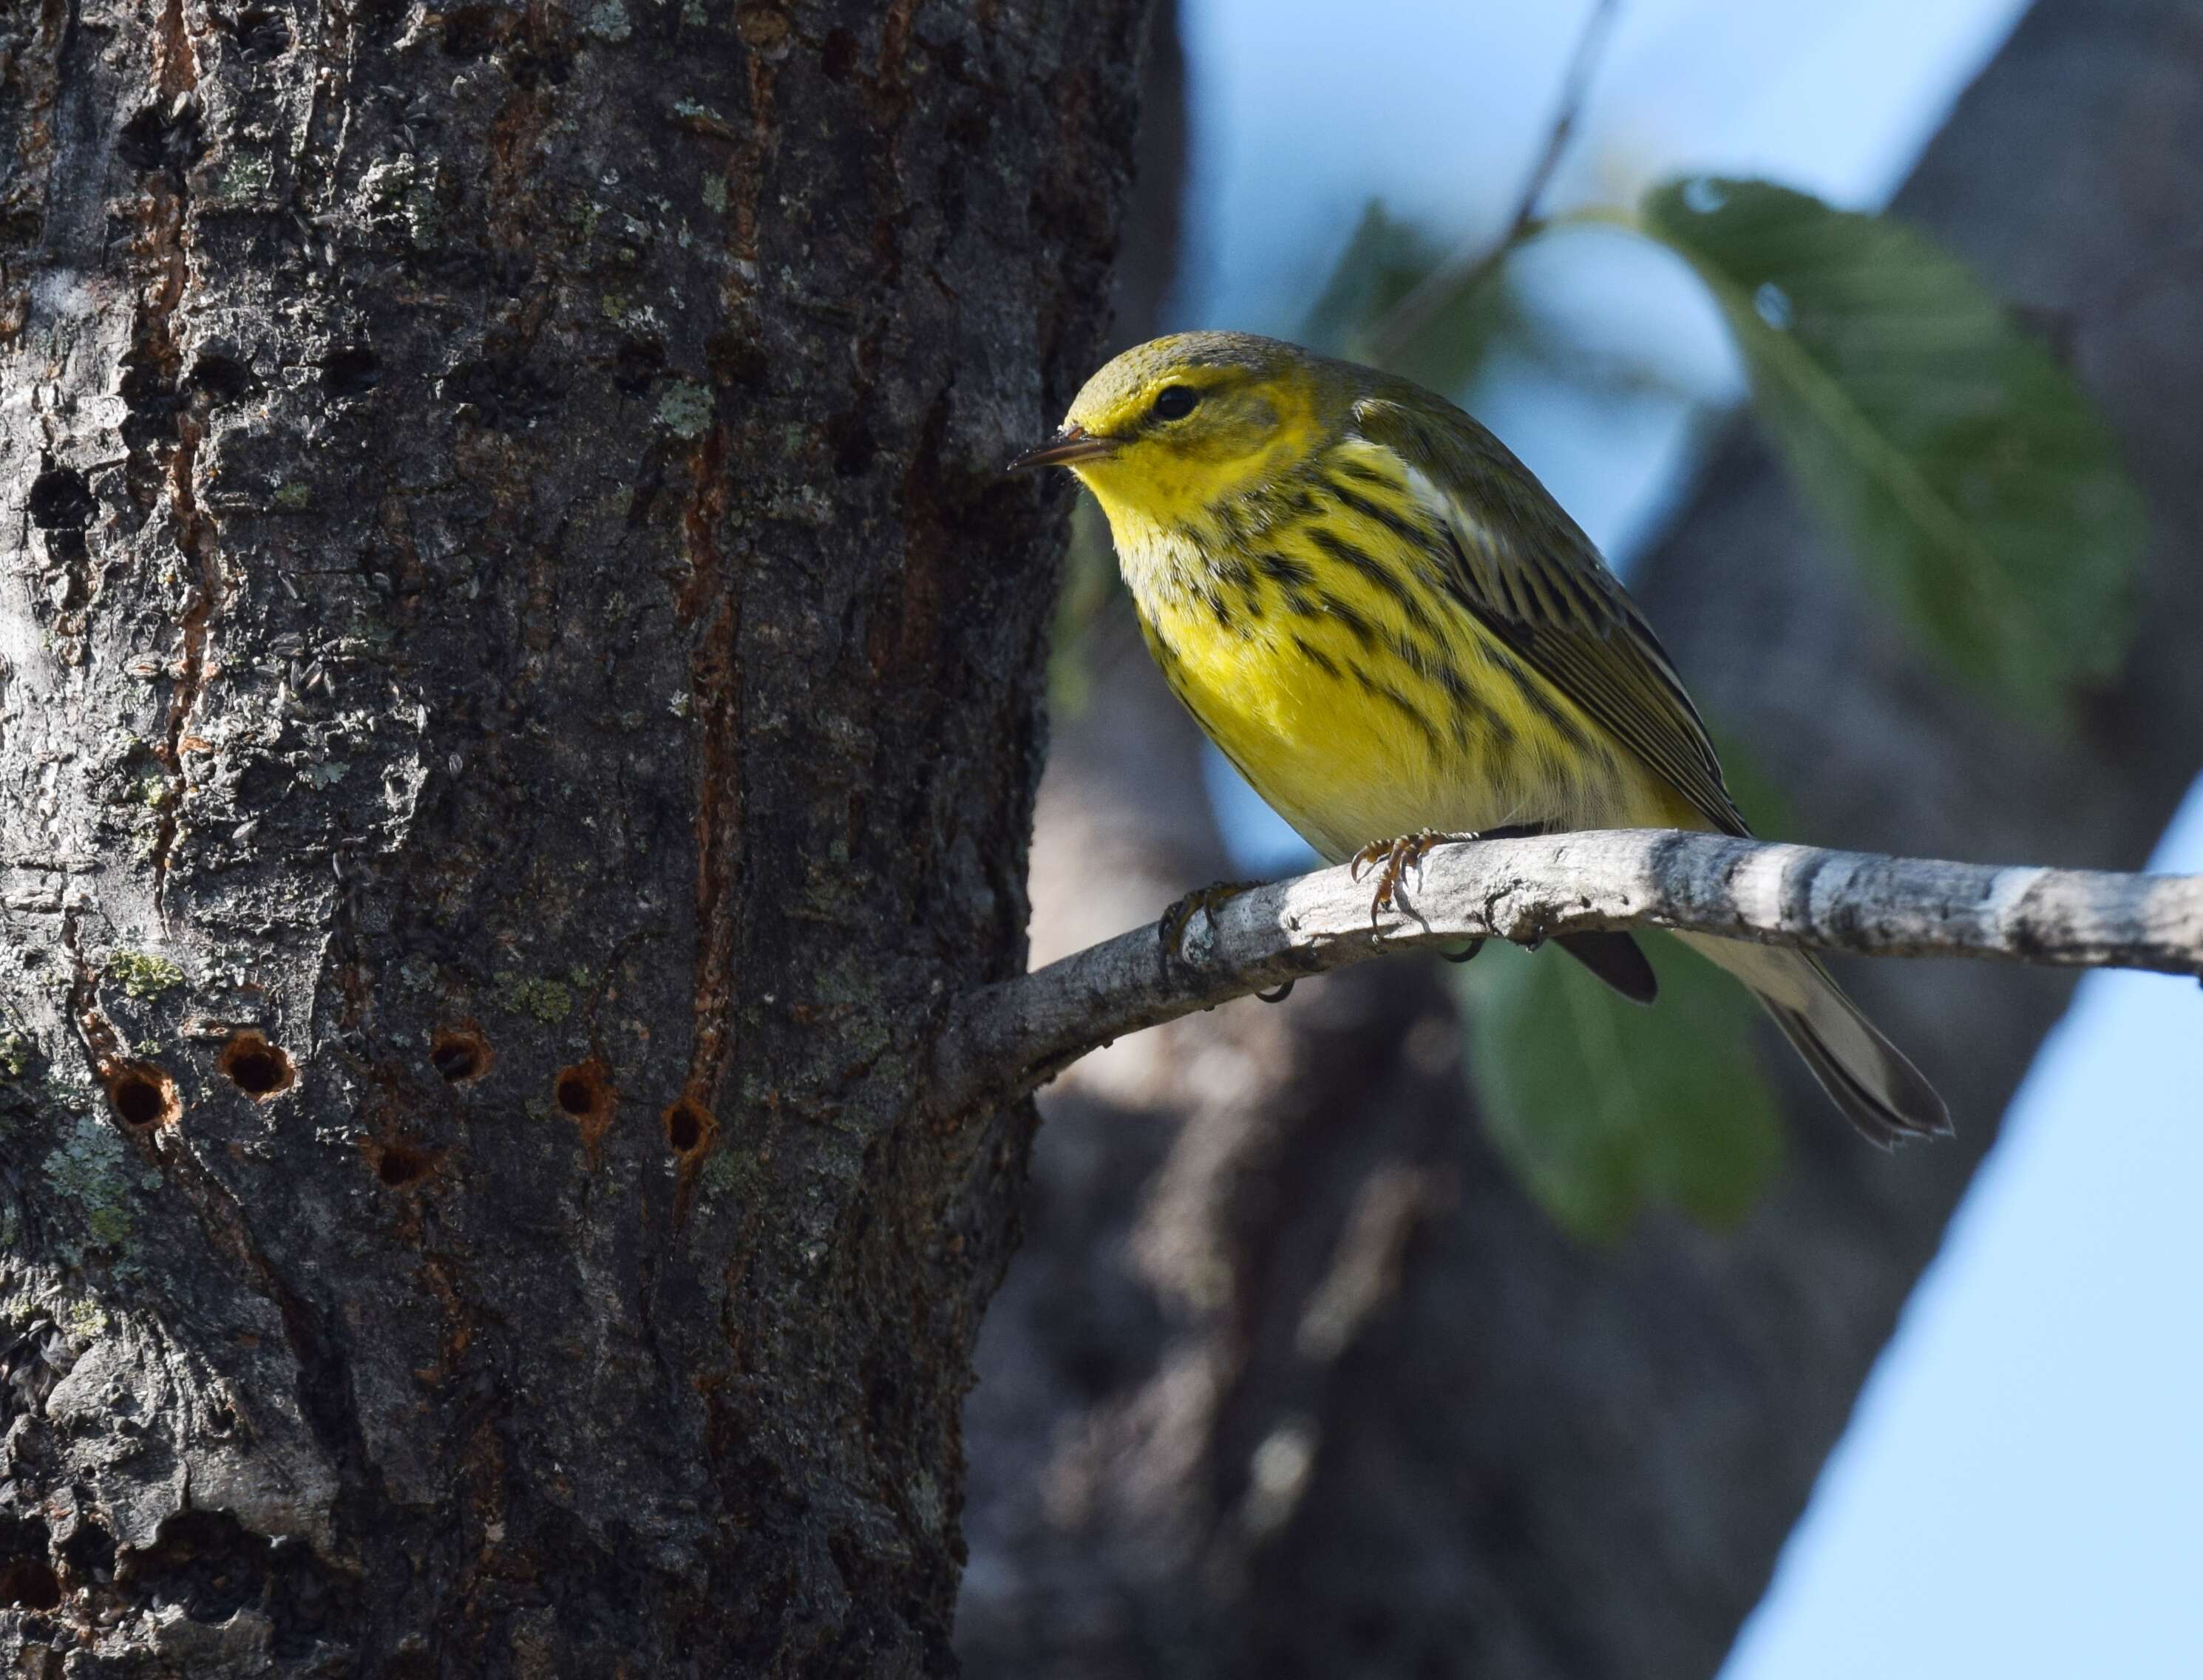 Image of Cape May Warbler